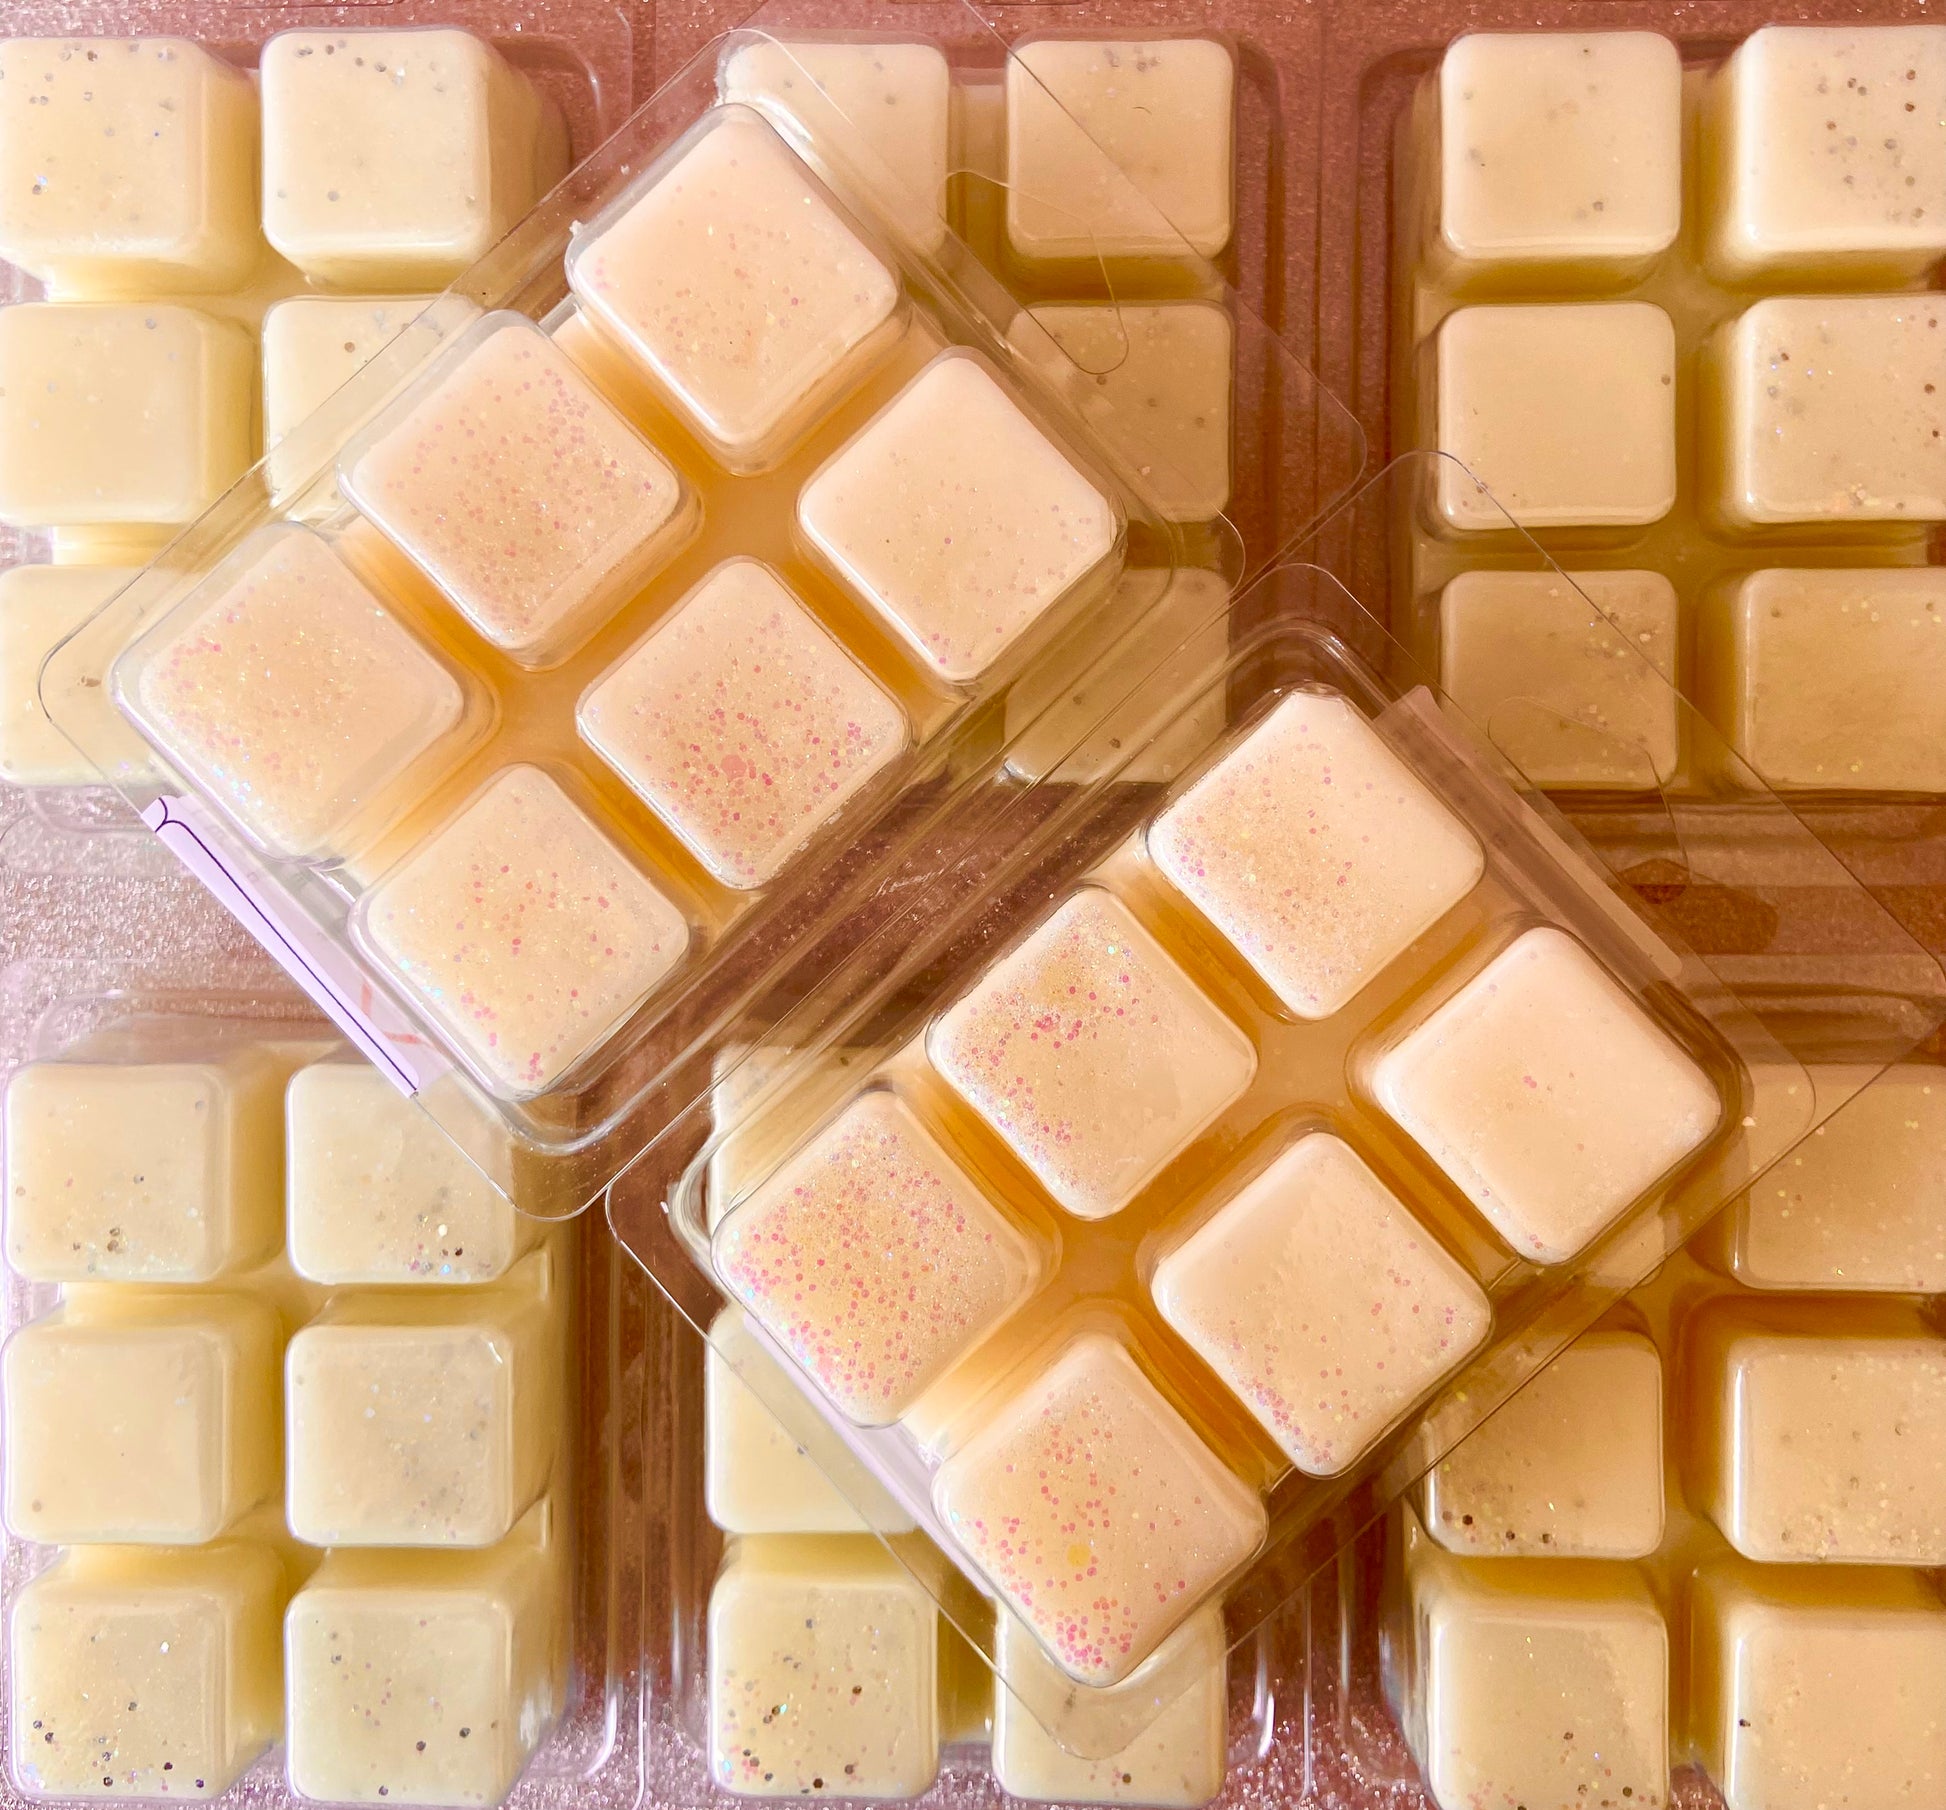 Assorted Mrs Millionaire Wax Melts in clear plastic packaging with varying colors and textures by The Soap Gals.